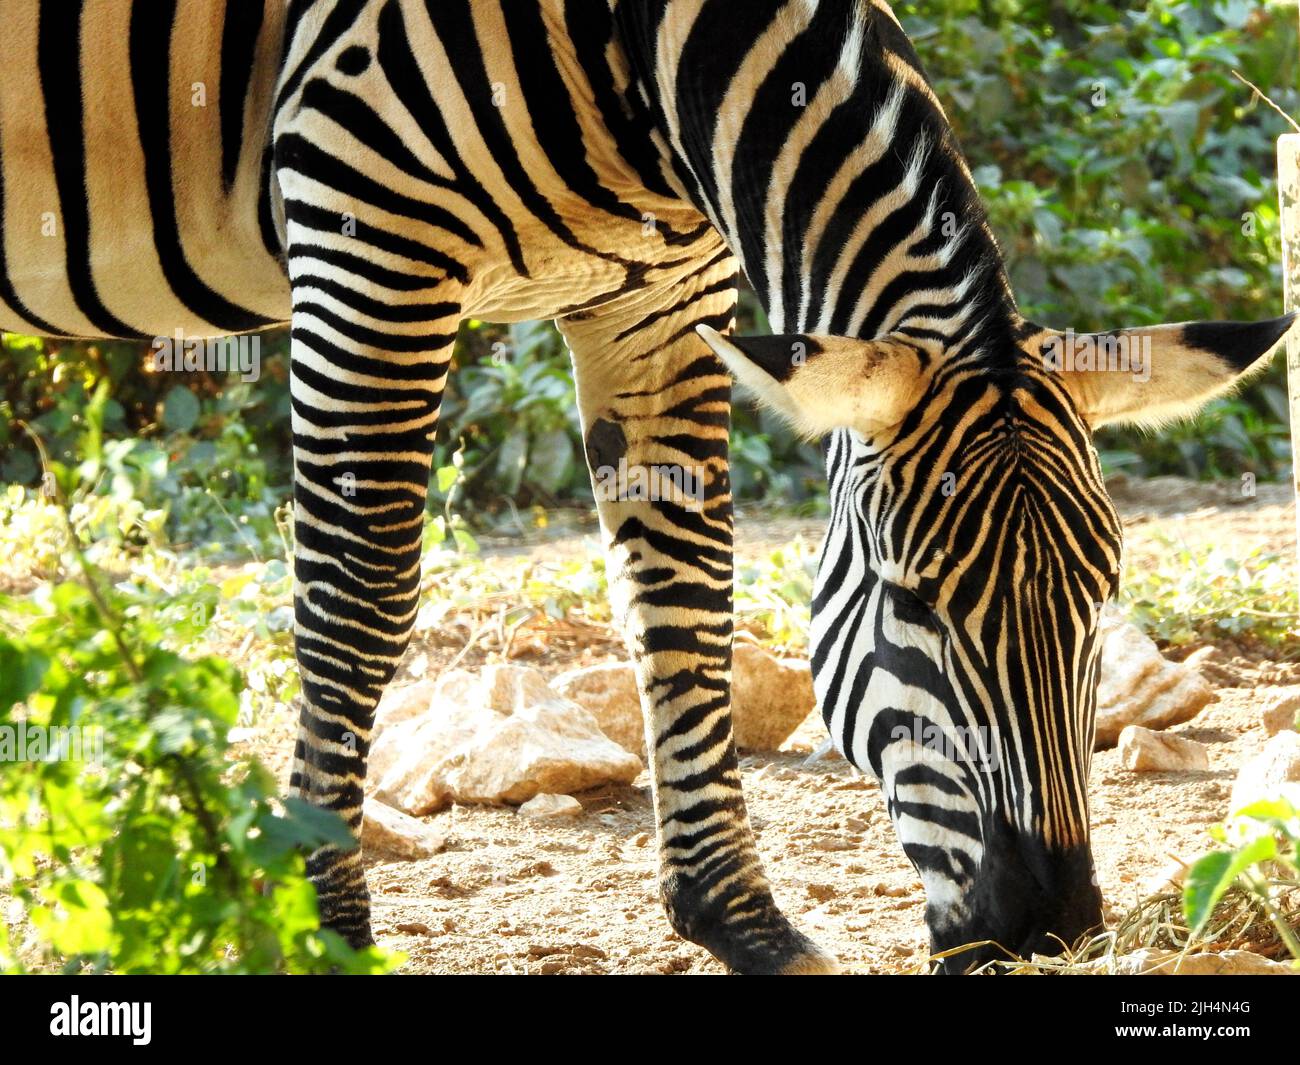 A wild zebra animal eating in a grass land, Zebras are African equines with distinctive black and white striped coats with three types grevy, plains a Stock Photo